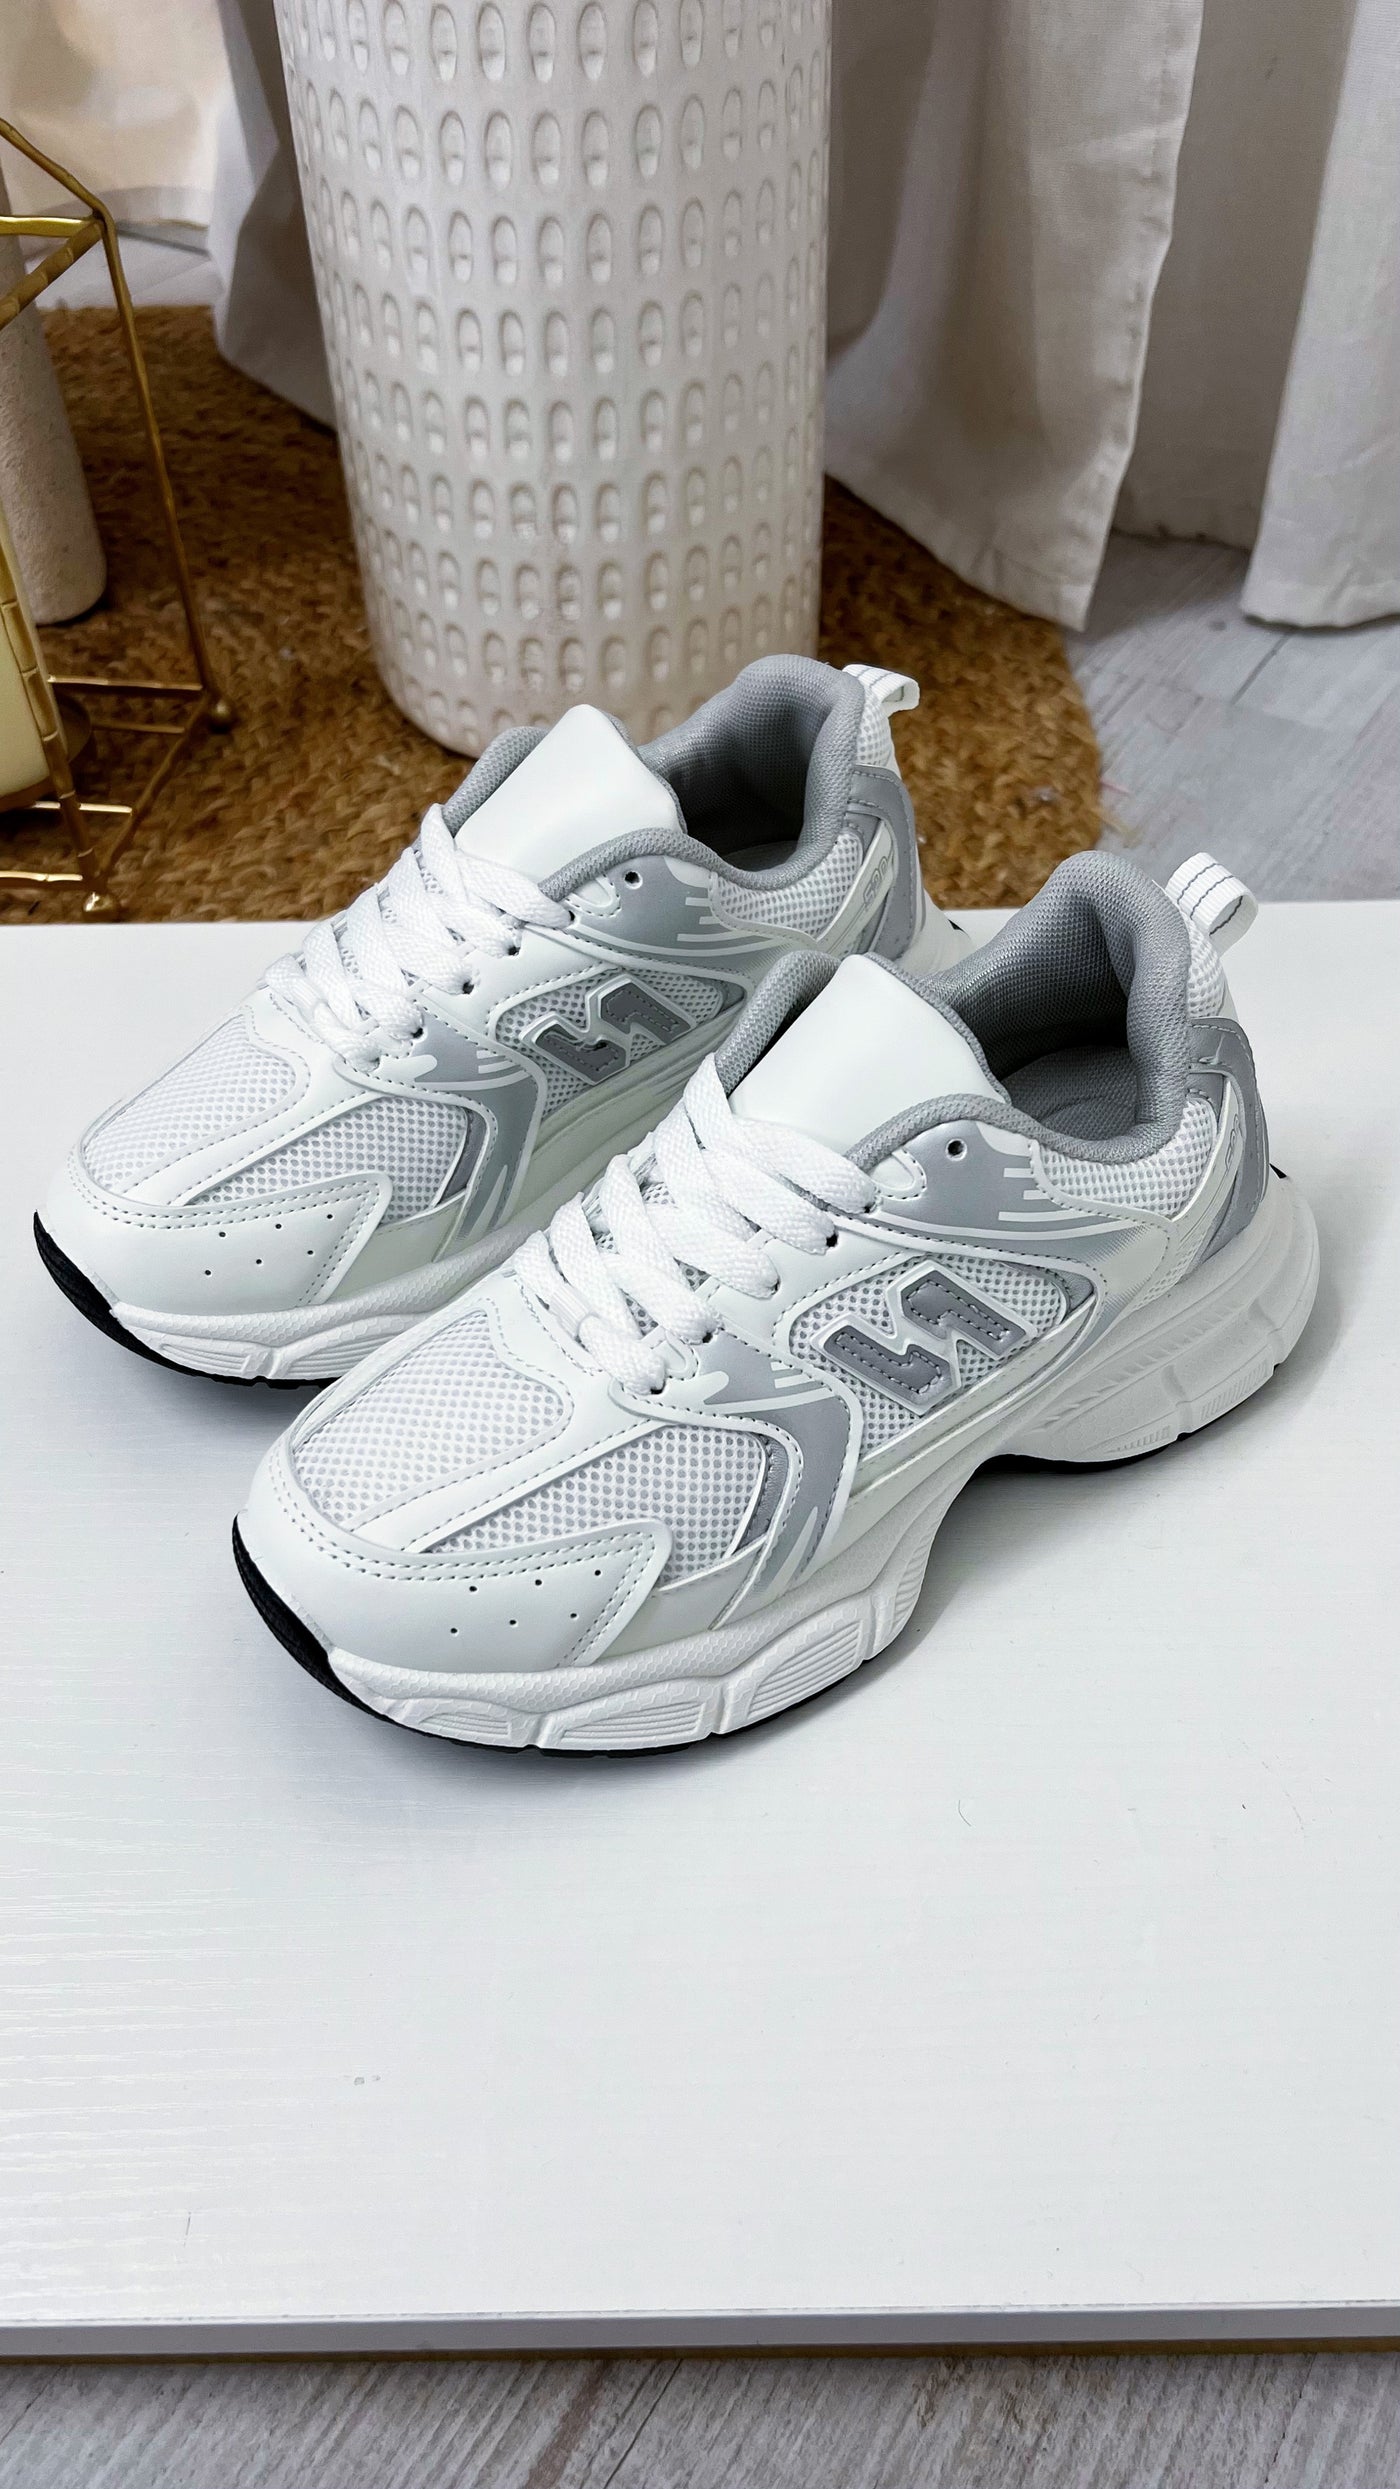 Retro Chunky 530 Trainers - WHITE/SILVER